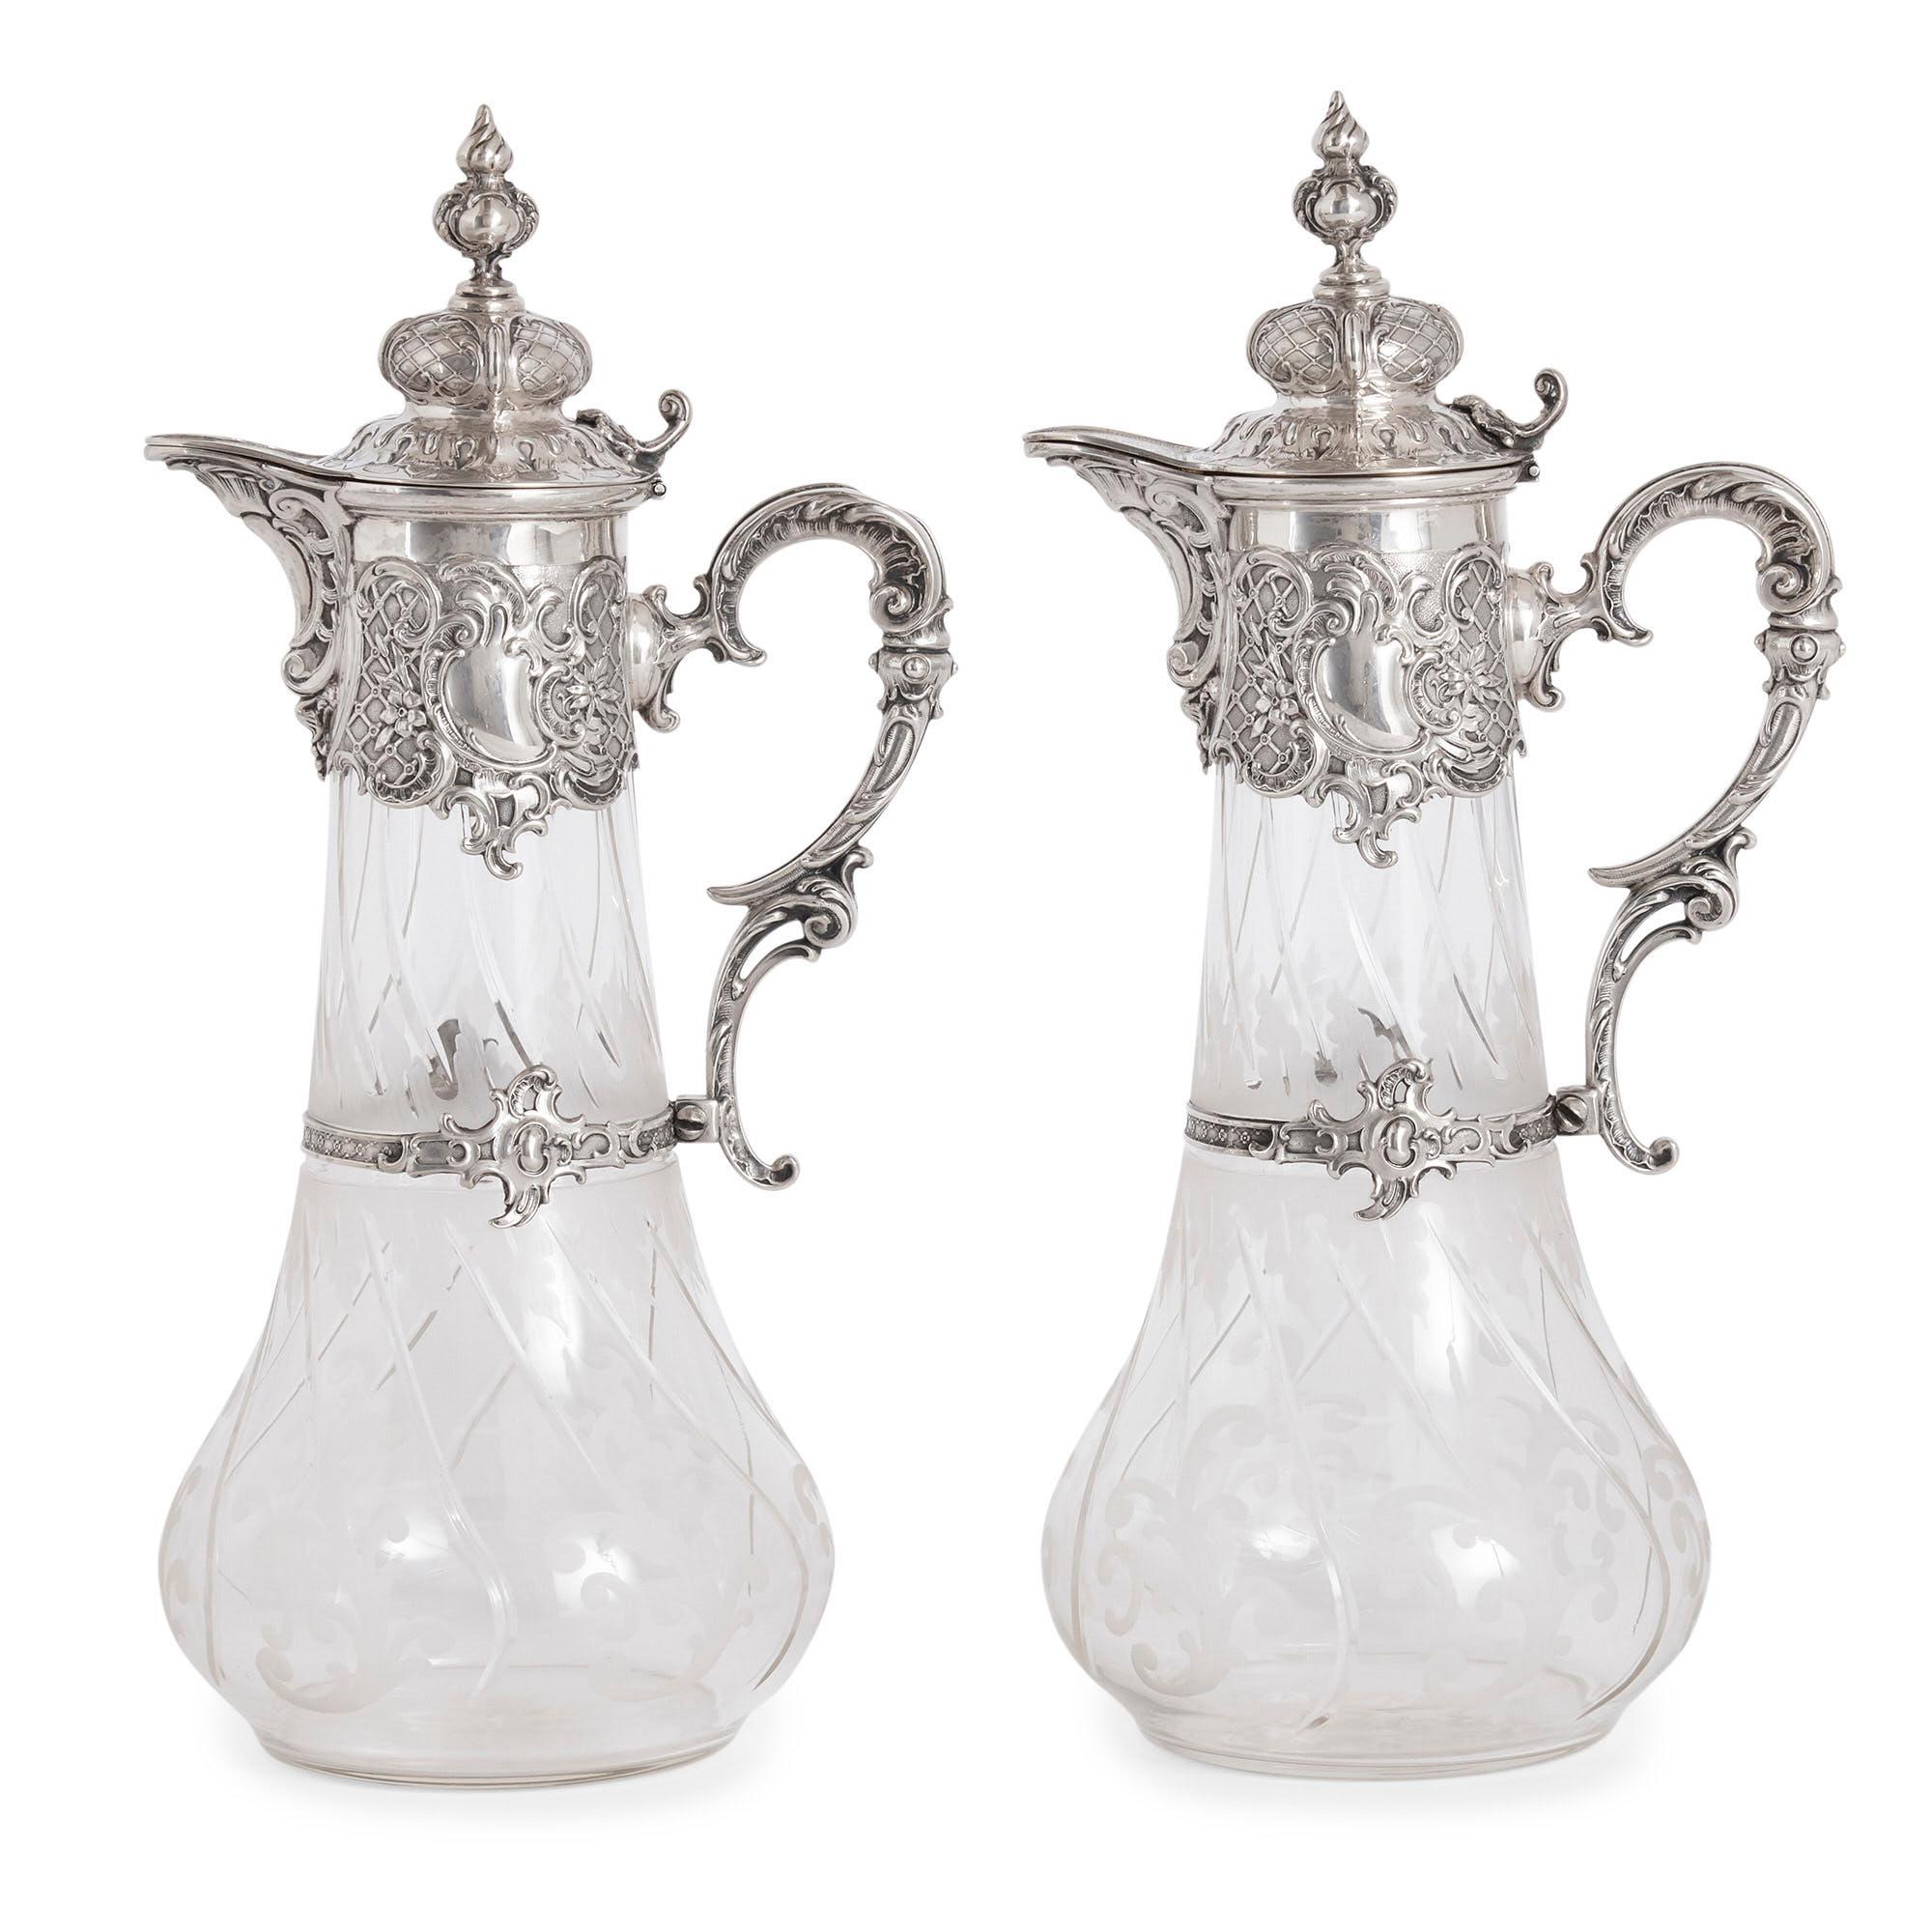 Pair of etched glass and silver pitchers by Bruckmann & Söhne
German, circa 1900
Measures: Height 33cm, width 17cm, depth 14cm

The pitchers, or claret jugs, in this pair by Bruckmann & Söhne are of traditional form, each crafted from silver